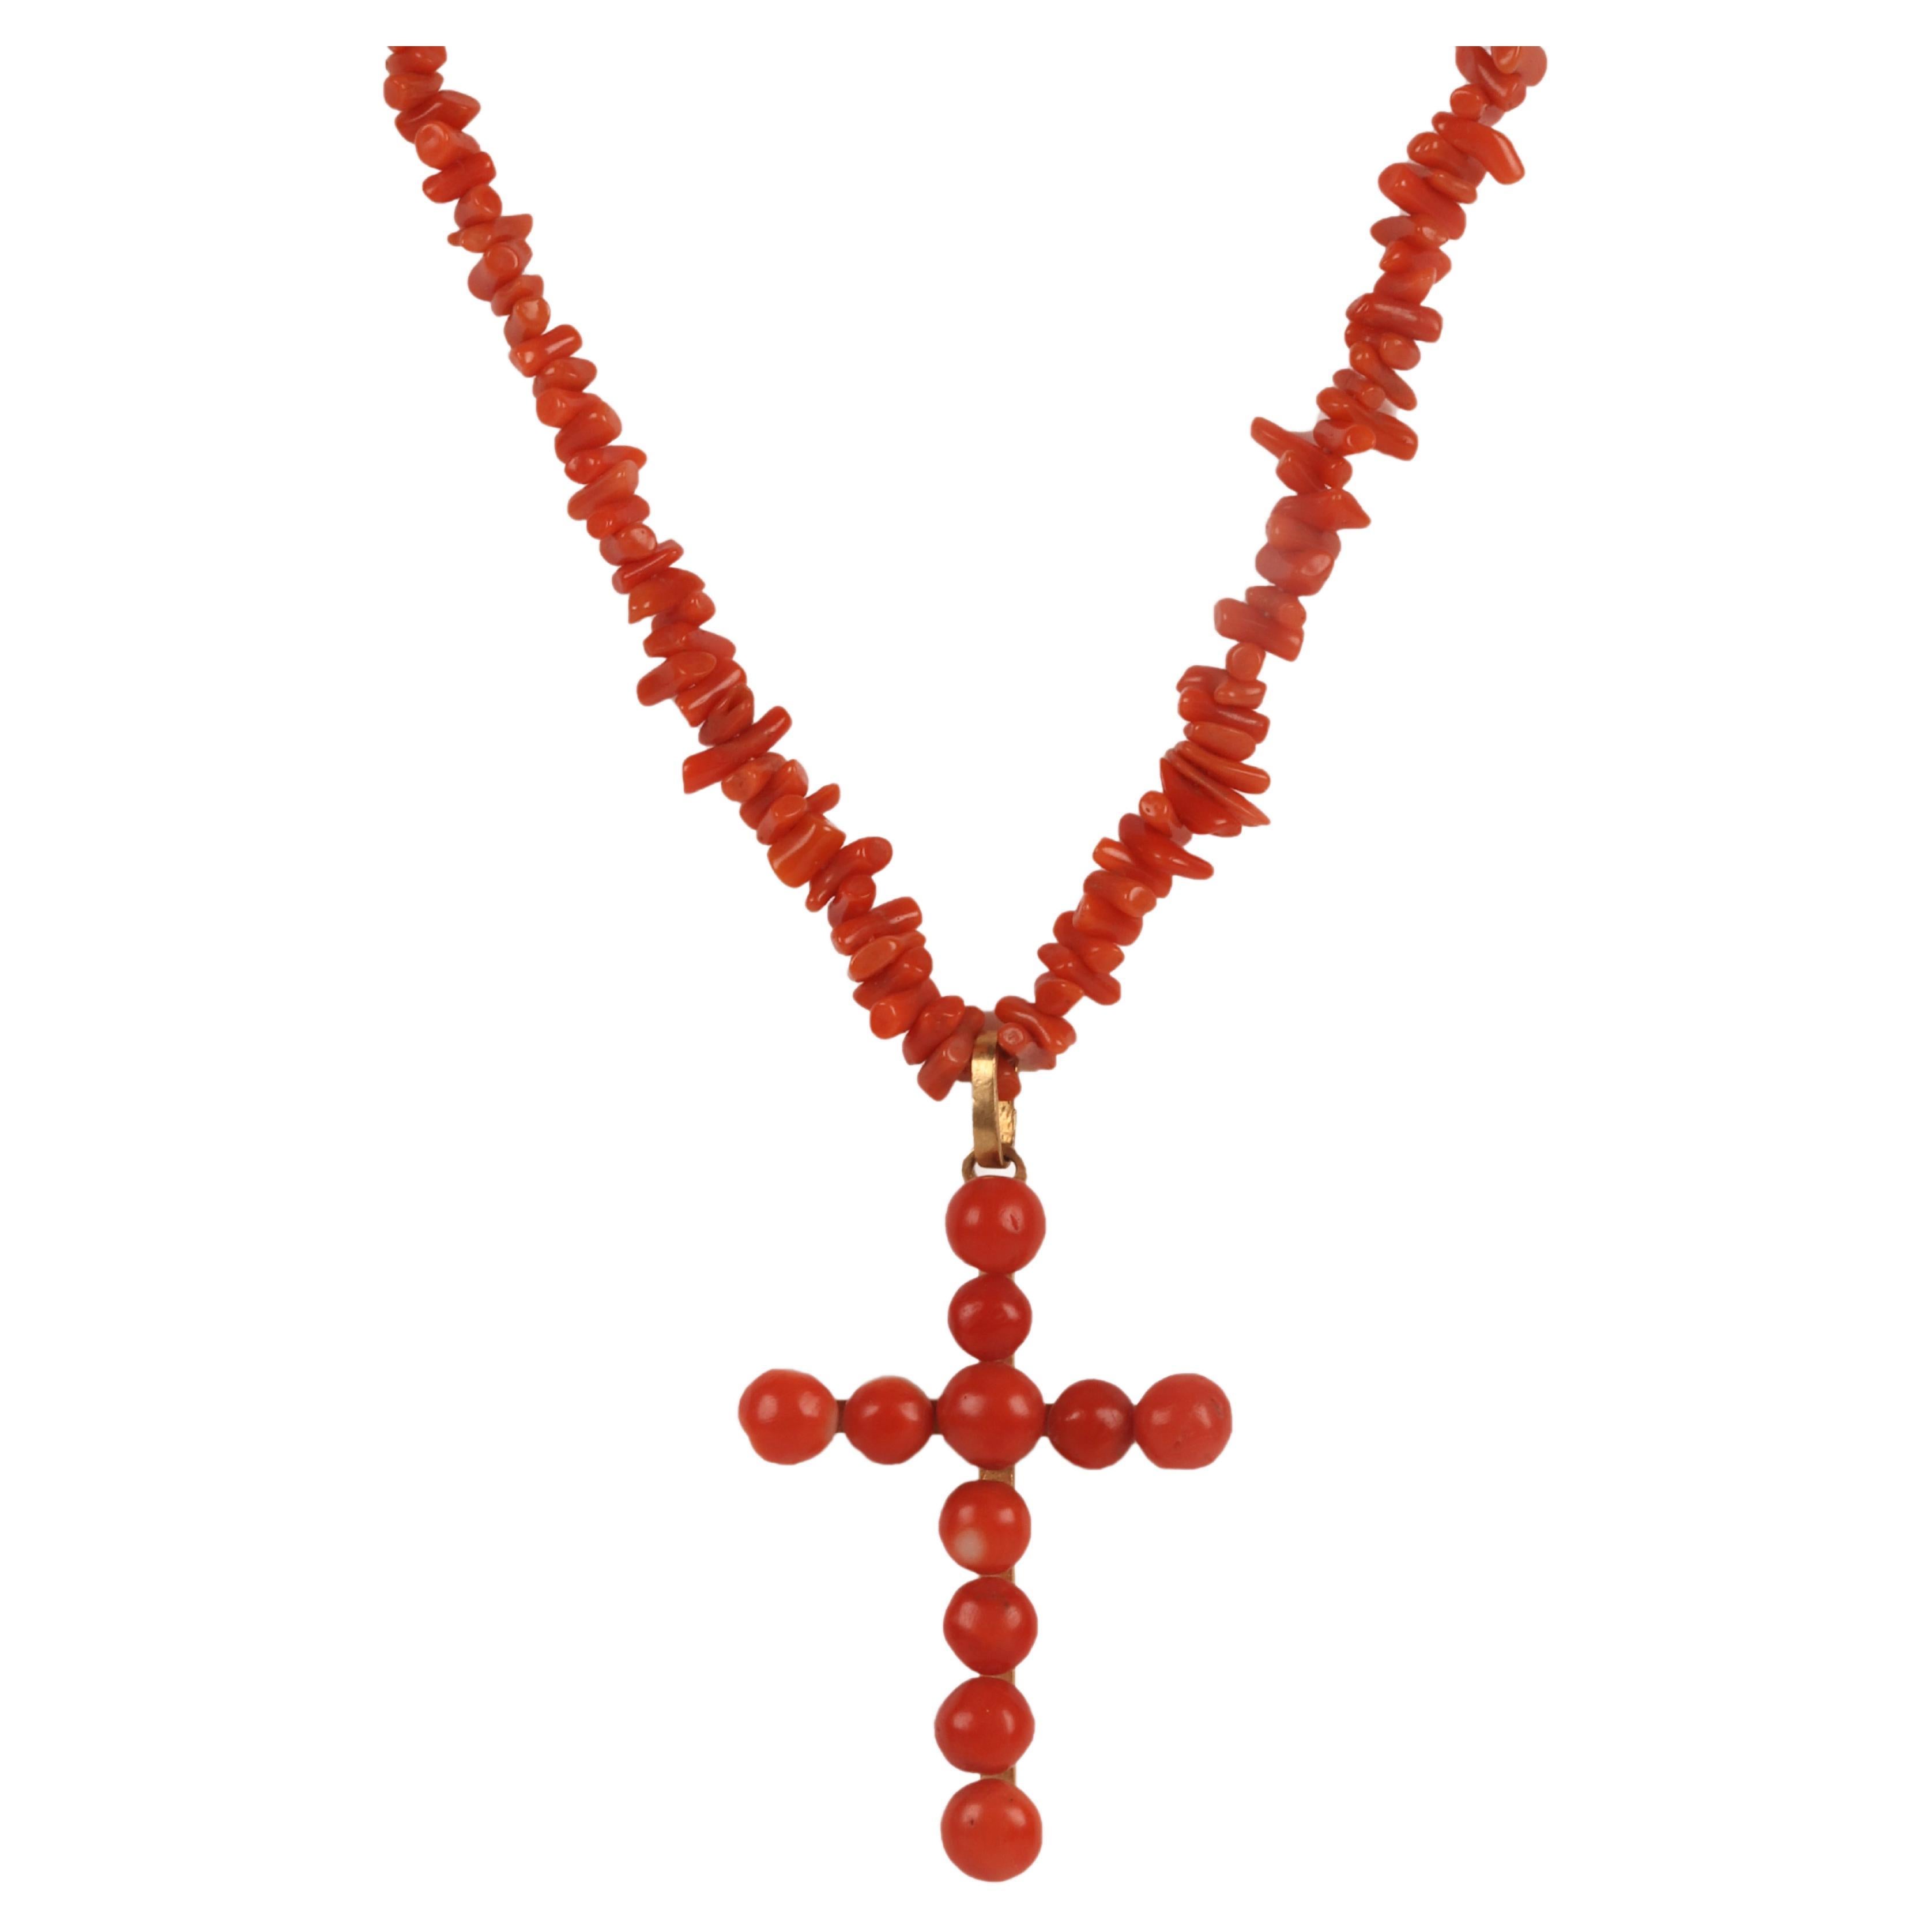 Cross necklace. Mediterranean coral from Sciacca, England 1880.